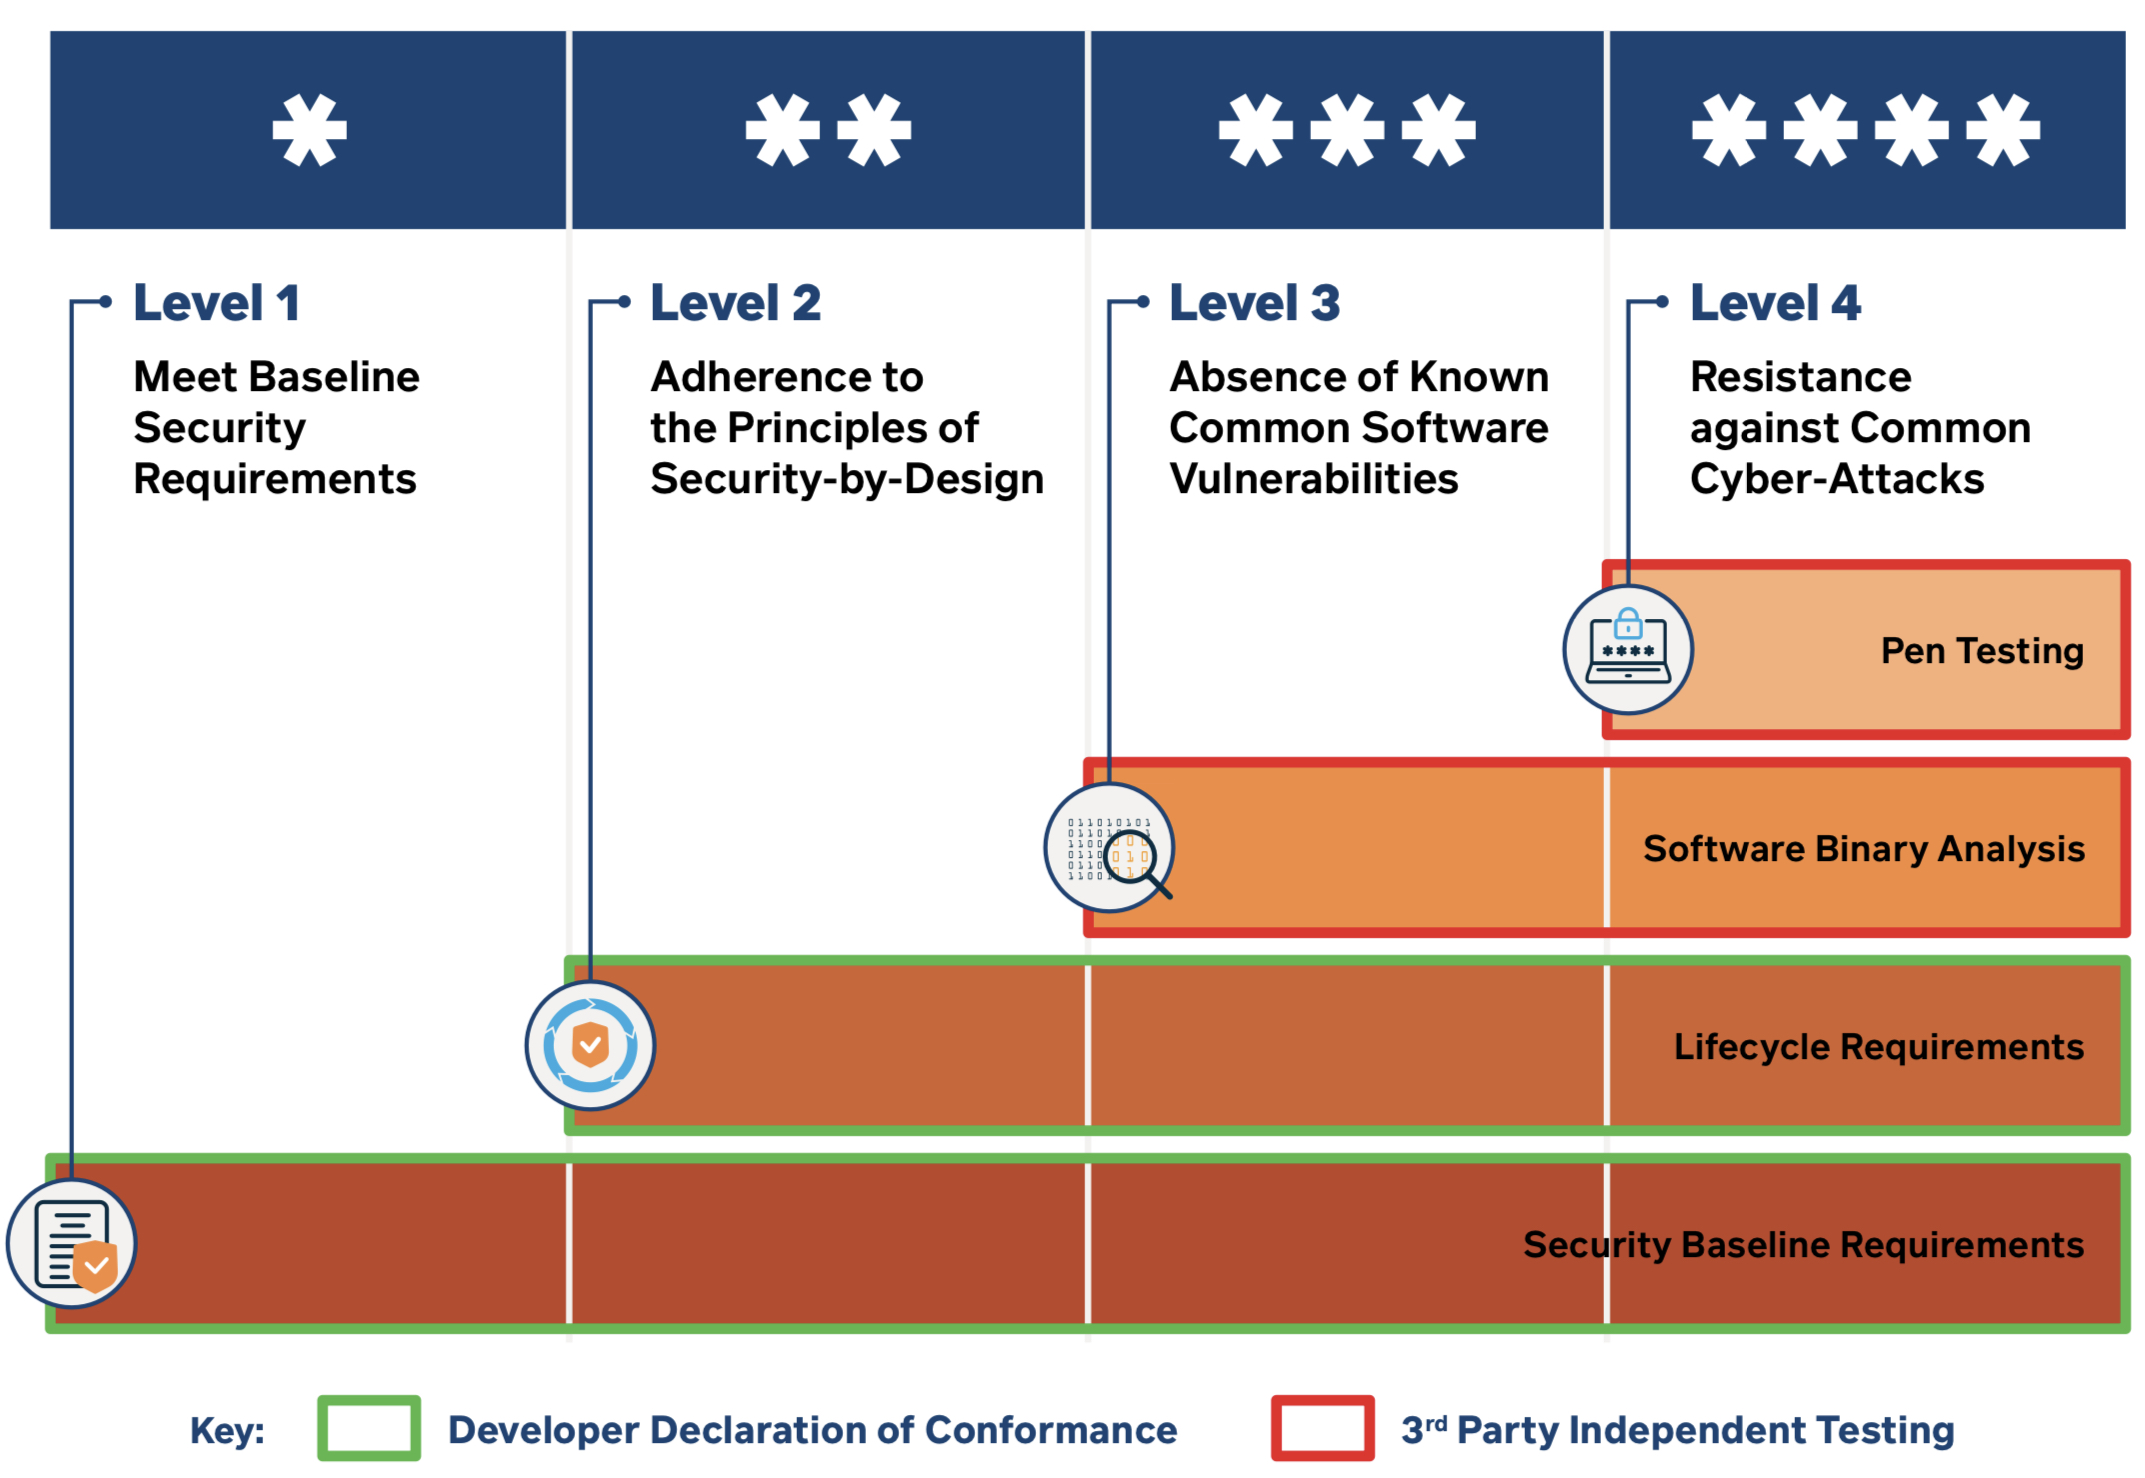 The Cybersecurity Labeling Scheme in Singapore, which gives consumer devices one of four ratings based on security practices.